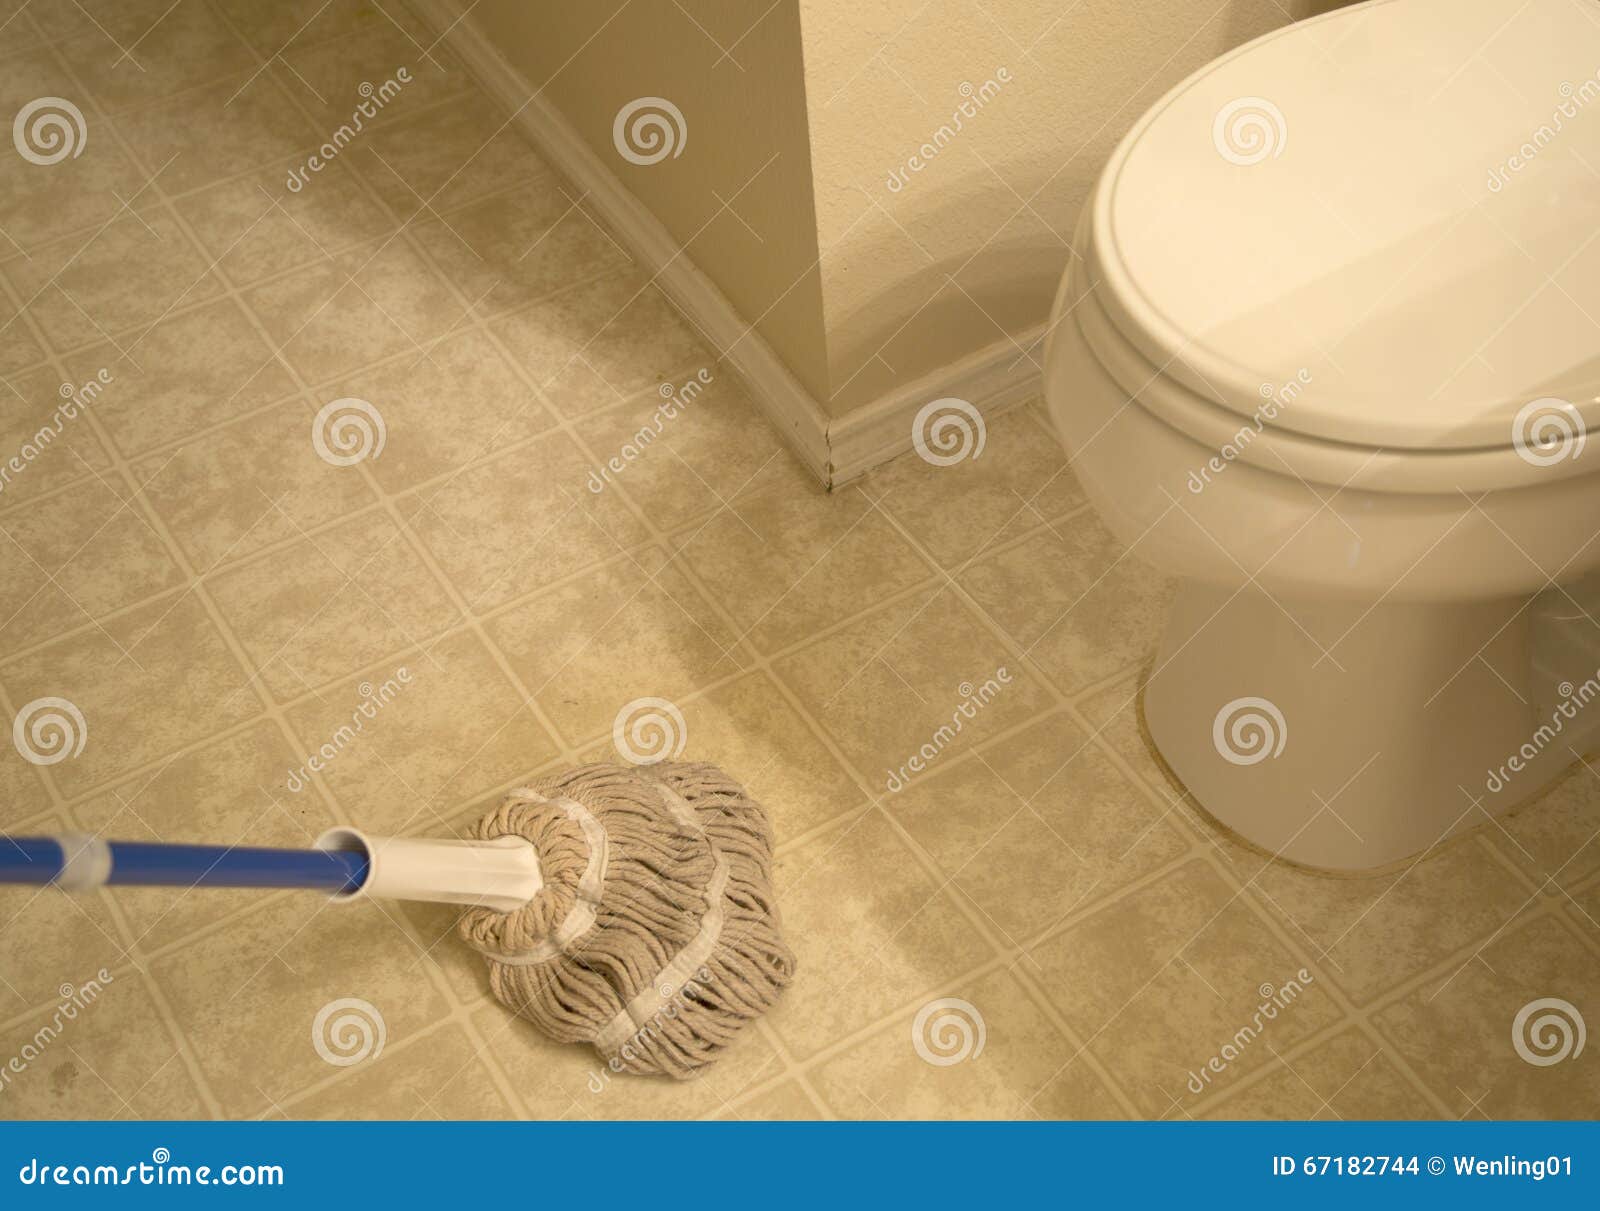 wiped the bathroom tiled floor with mop